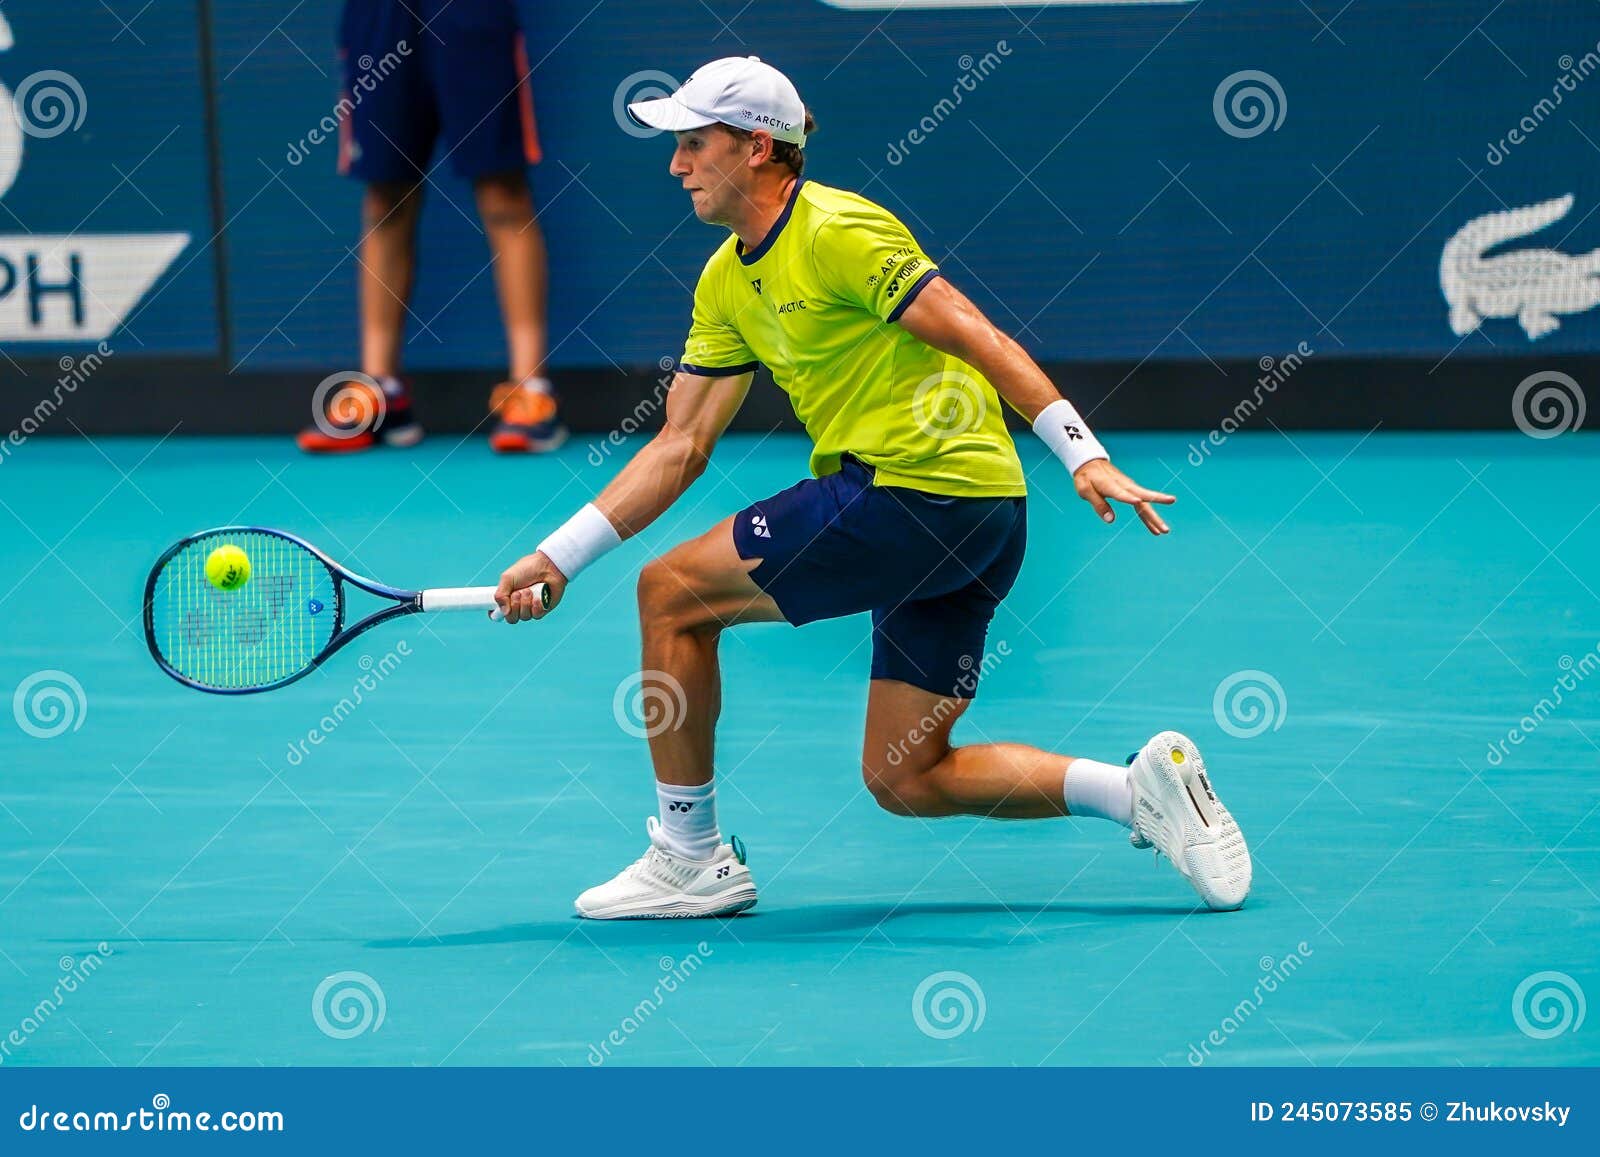 Miami Open 2022 Finalist Casper Ruud of Norway in Action during His Men`s Final Match Against Carlos Alcaraz Editorial Image